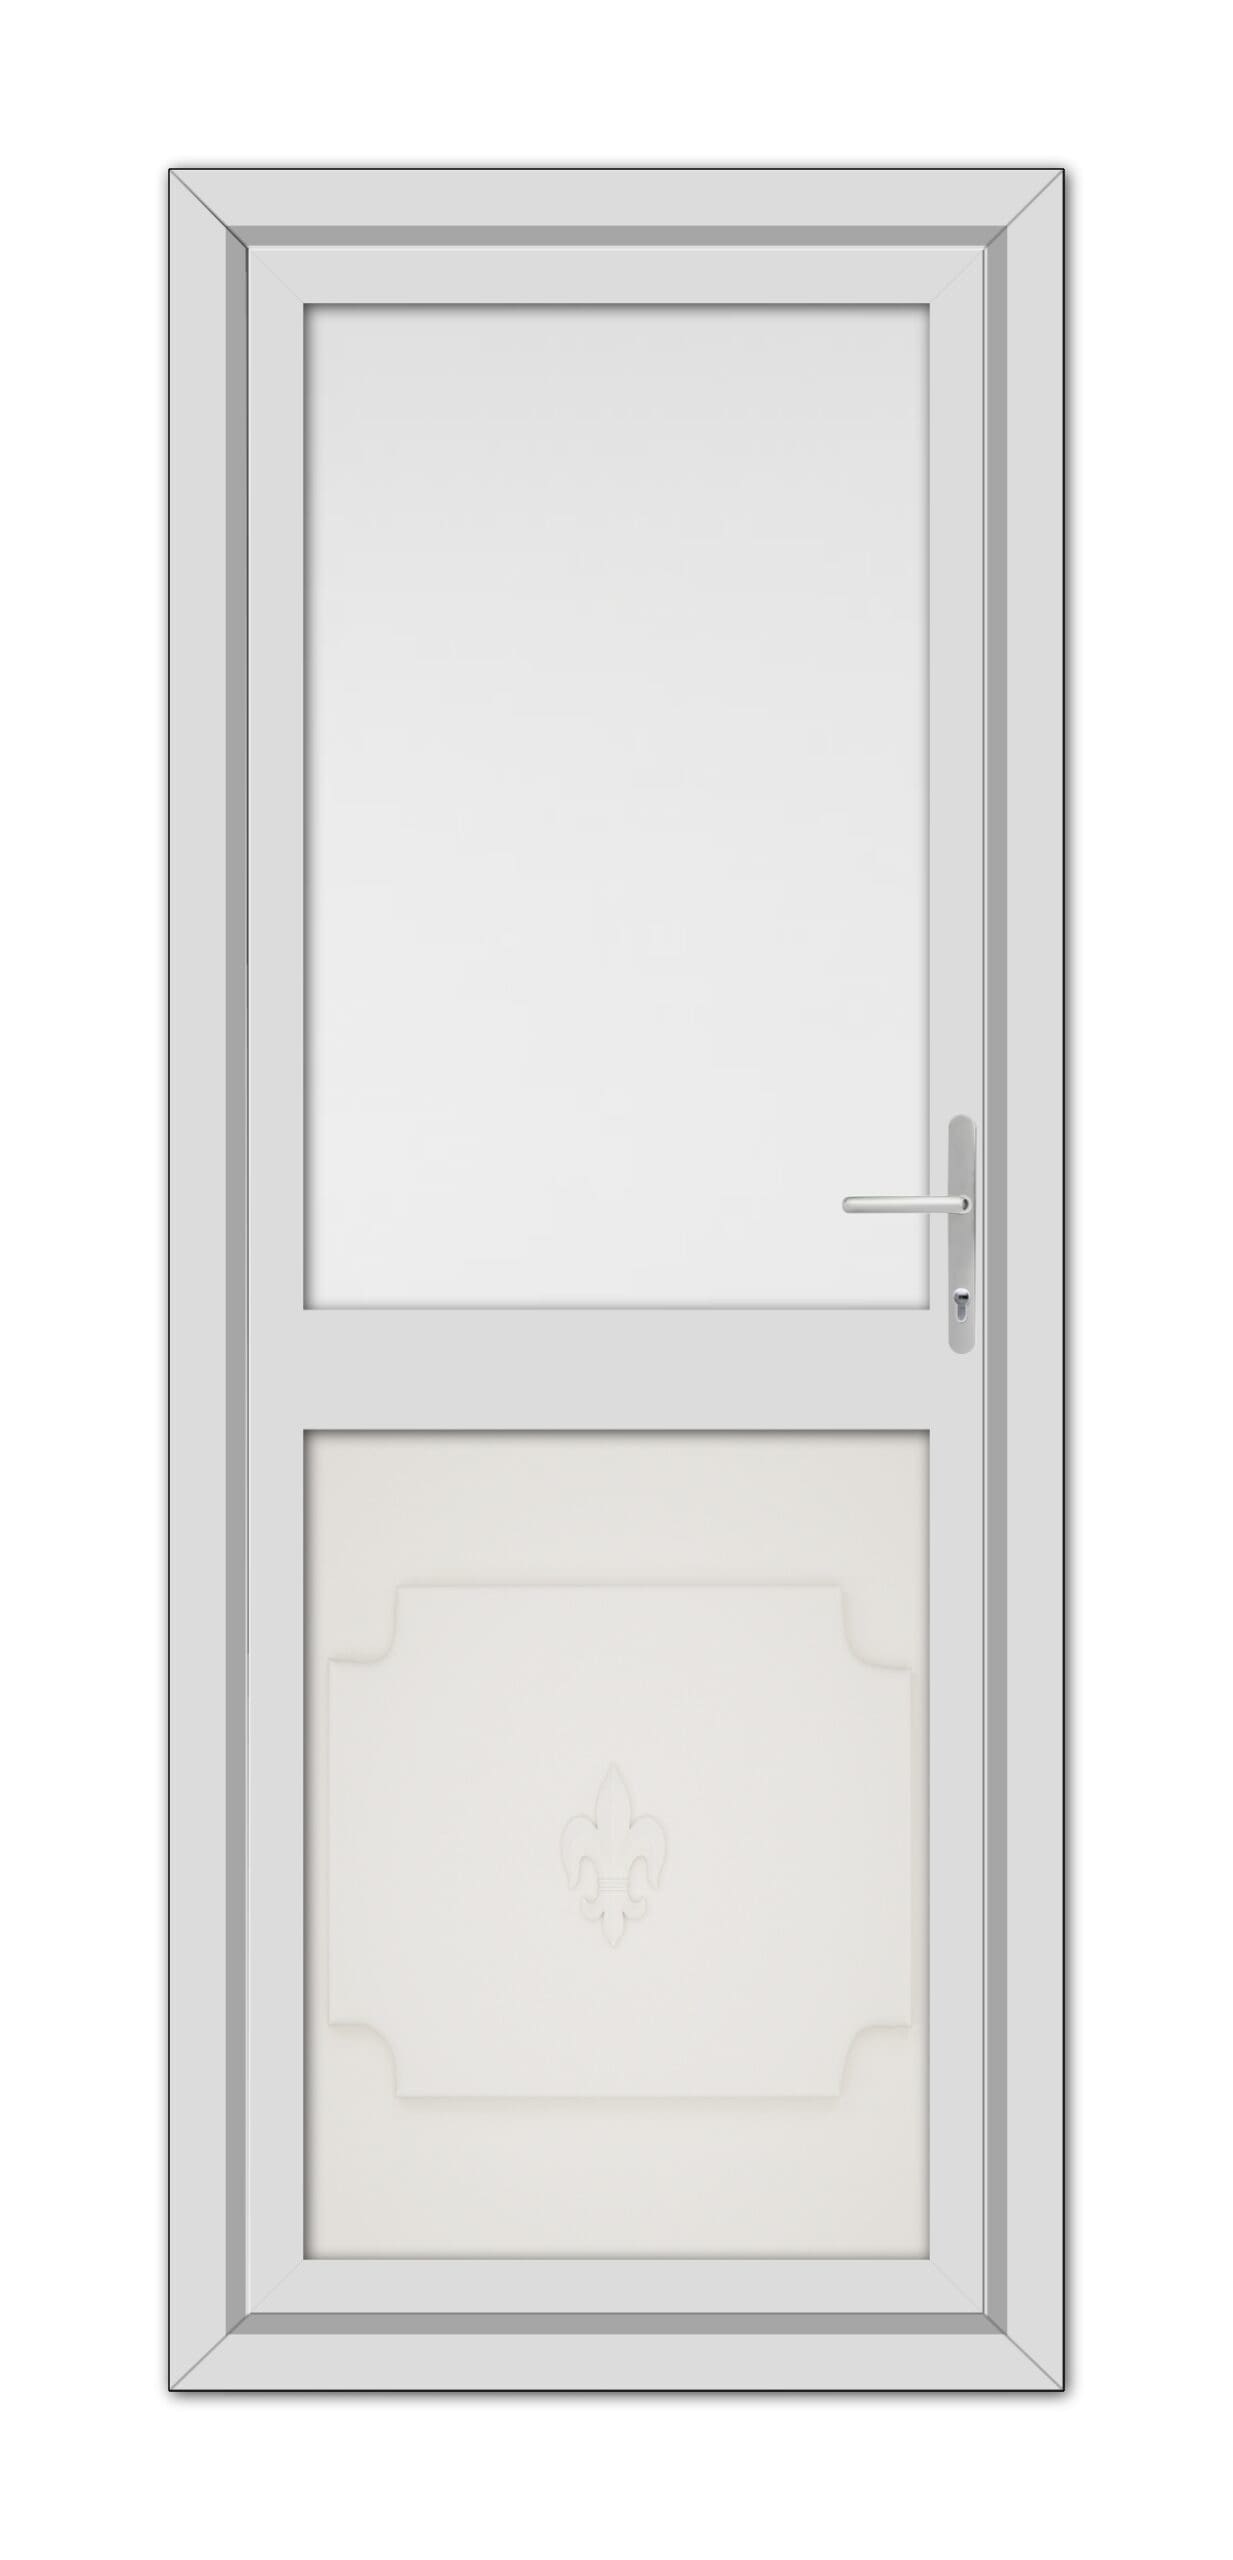 A modern White Cream Abbey Half uPVC Back Door featuring a square window at the top, a decorative raised panel at the bottom, and a metallic handle on the right side.